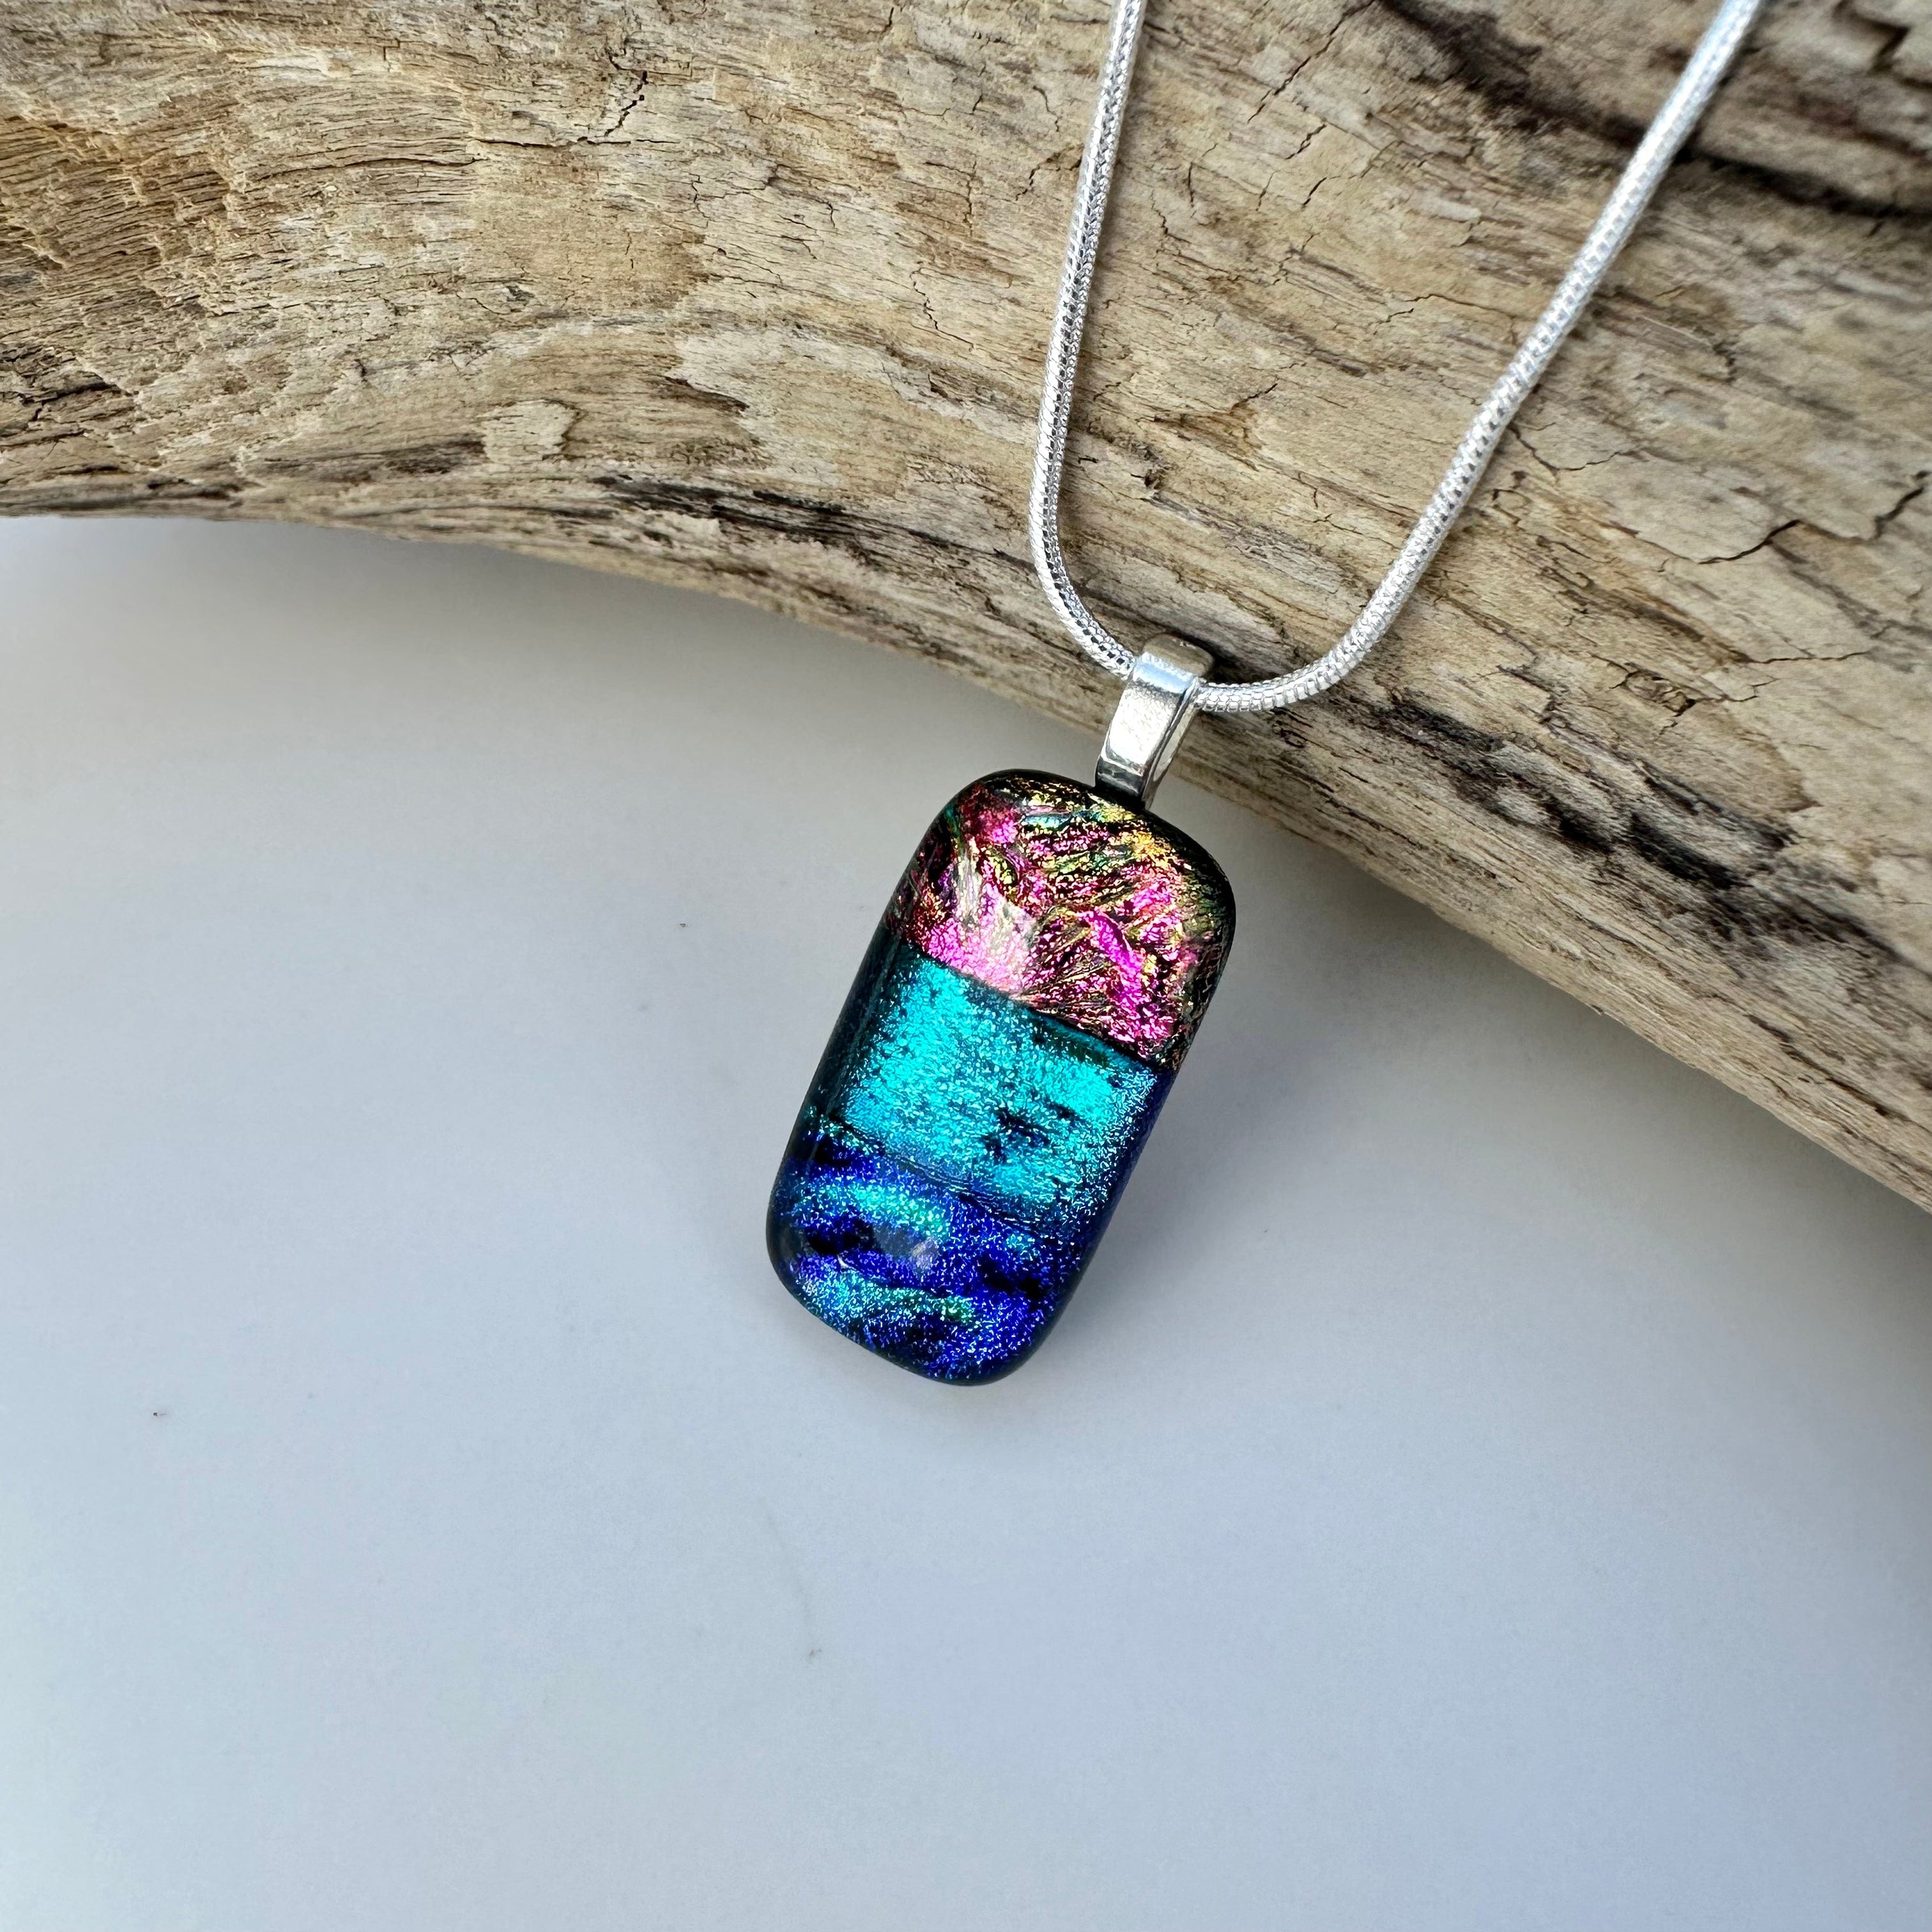 lusciousscarves Jewelry Dichroic Glass Pendant Necklace Handmade Pink Turquoise Seascape